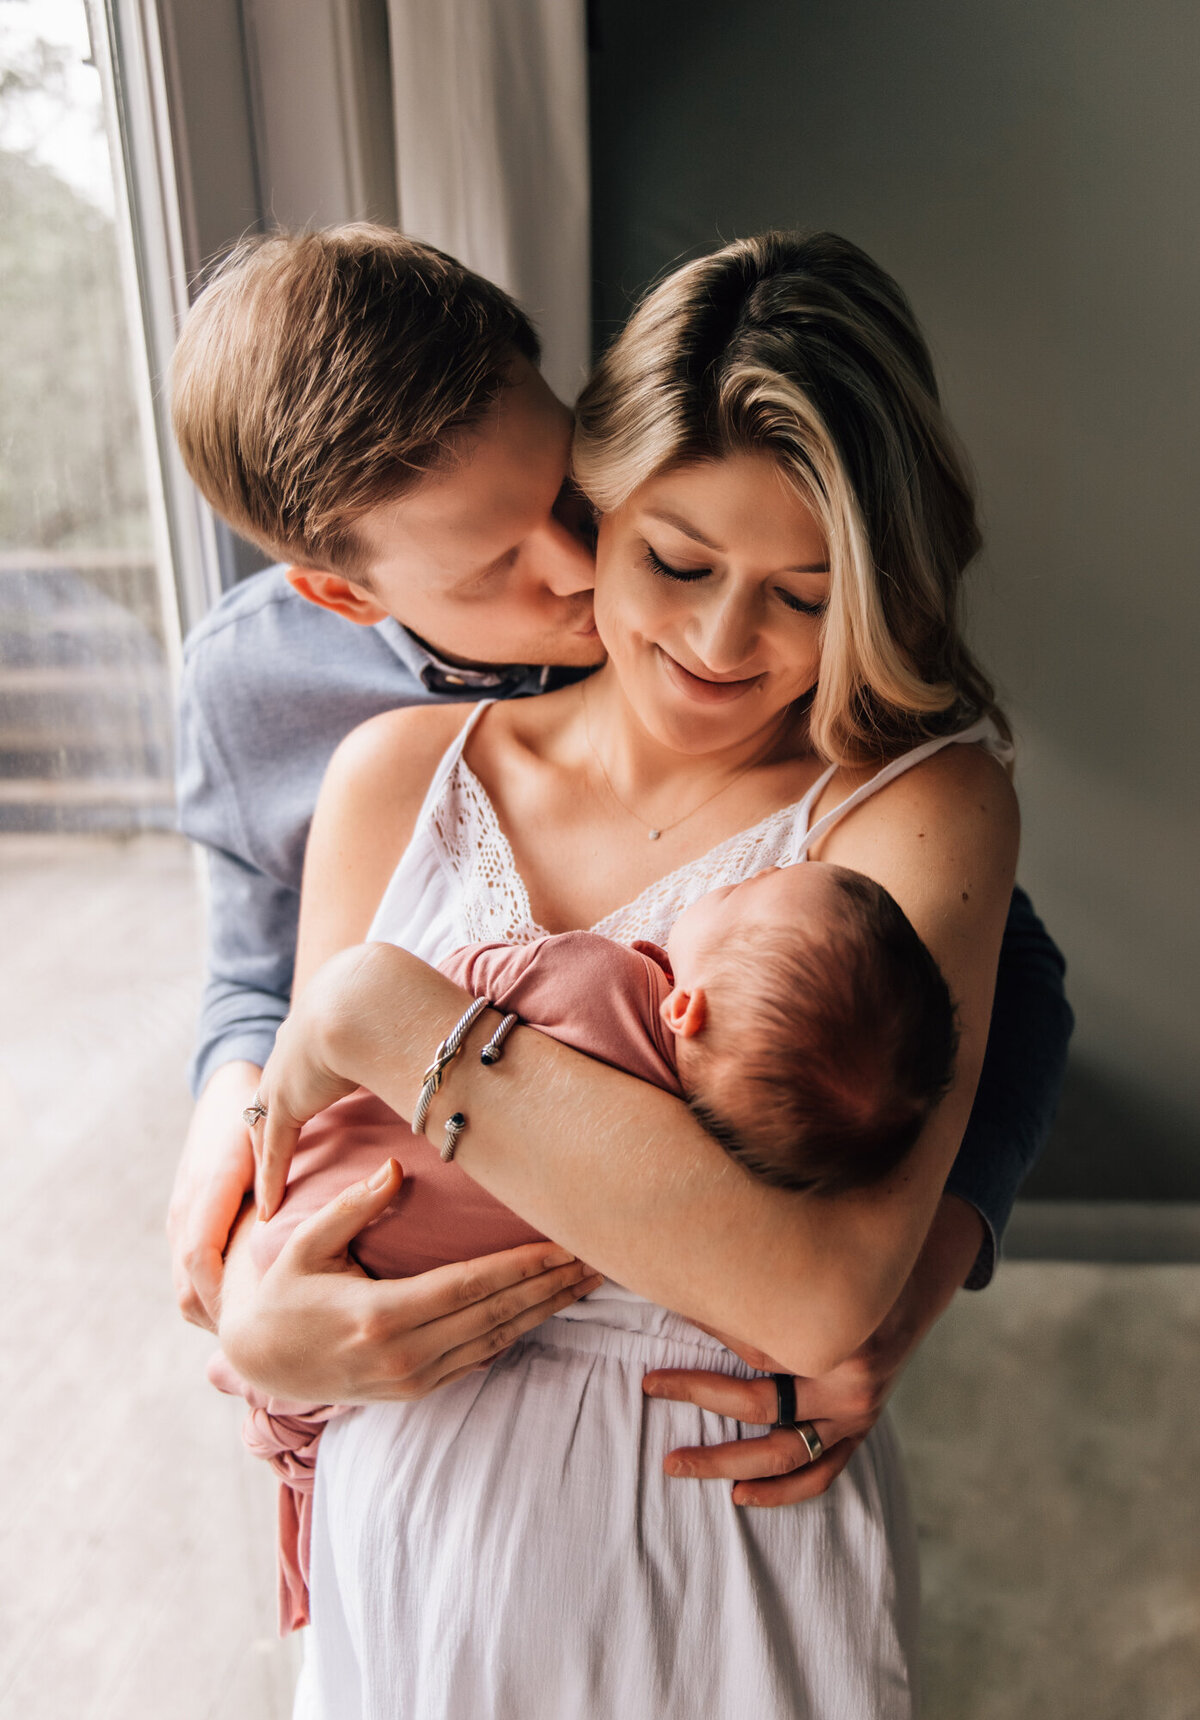 Newborn Photographer, Mom in dress holds baby daughter while dad kisses her on the side of her face.